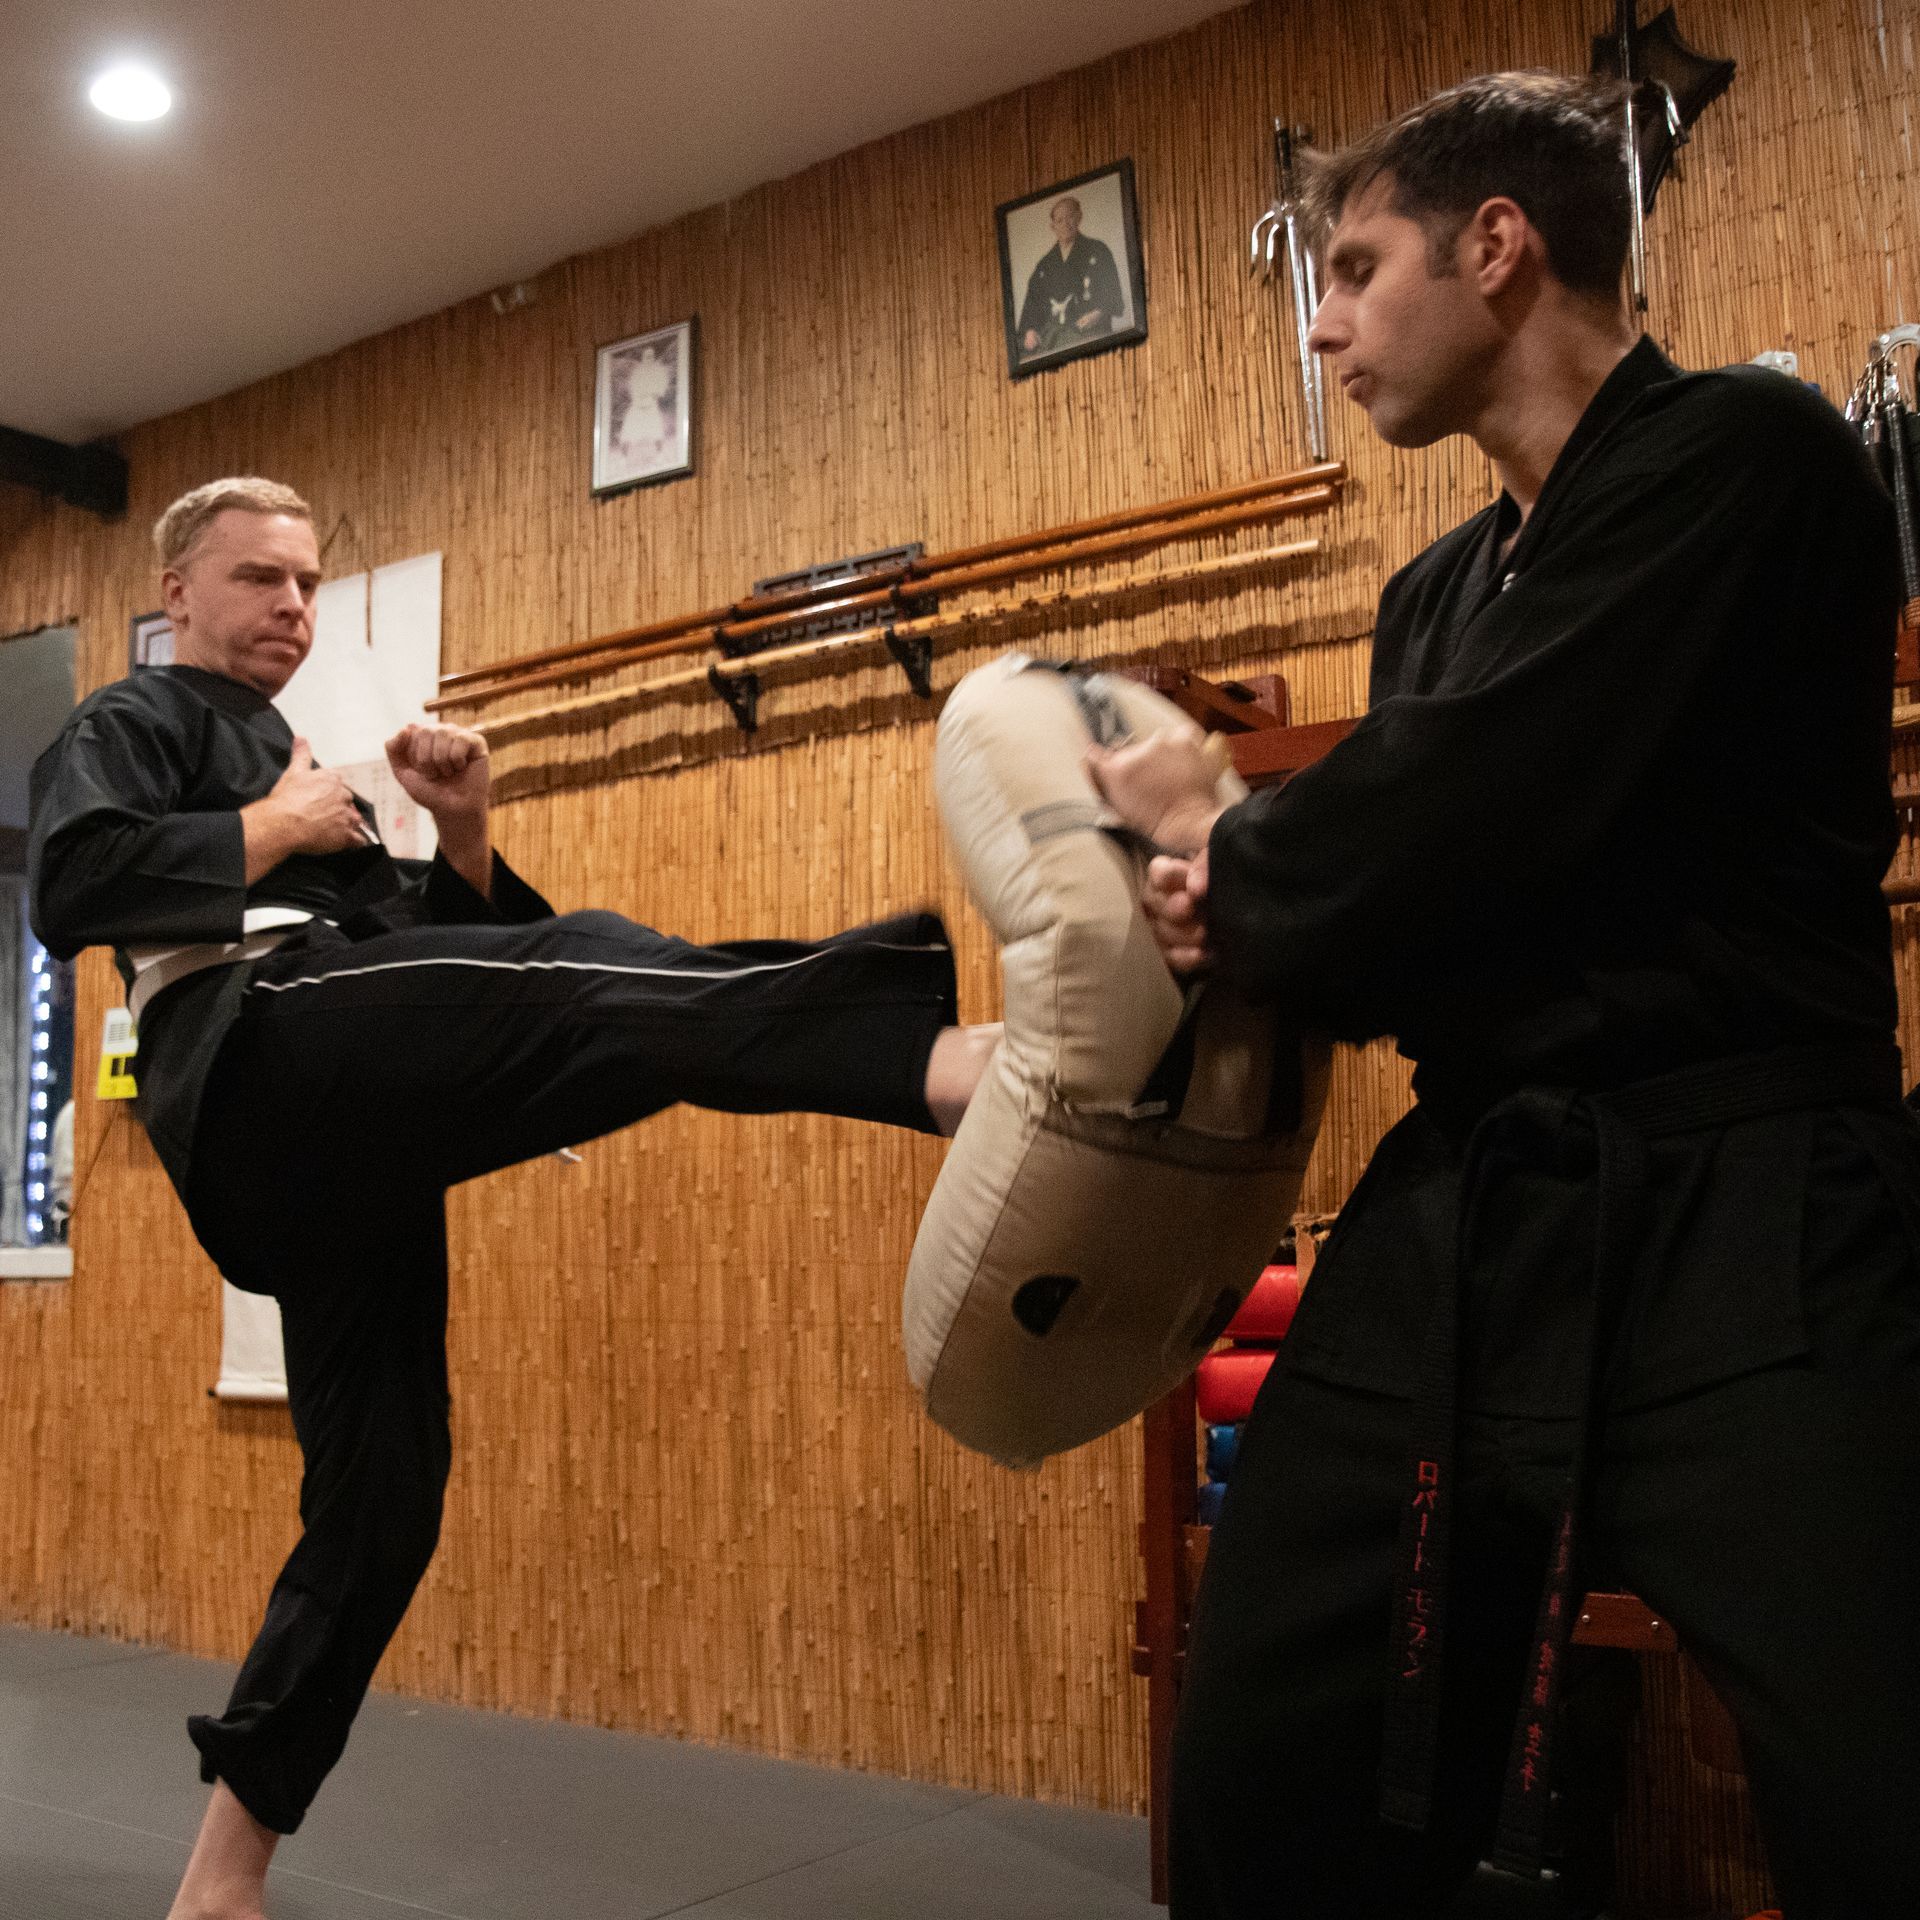 two young men are practicing karate in a gym